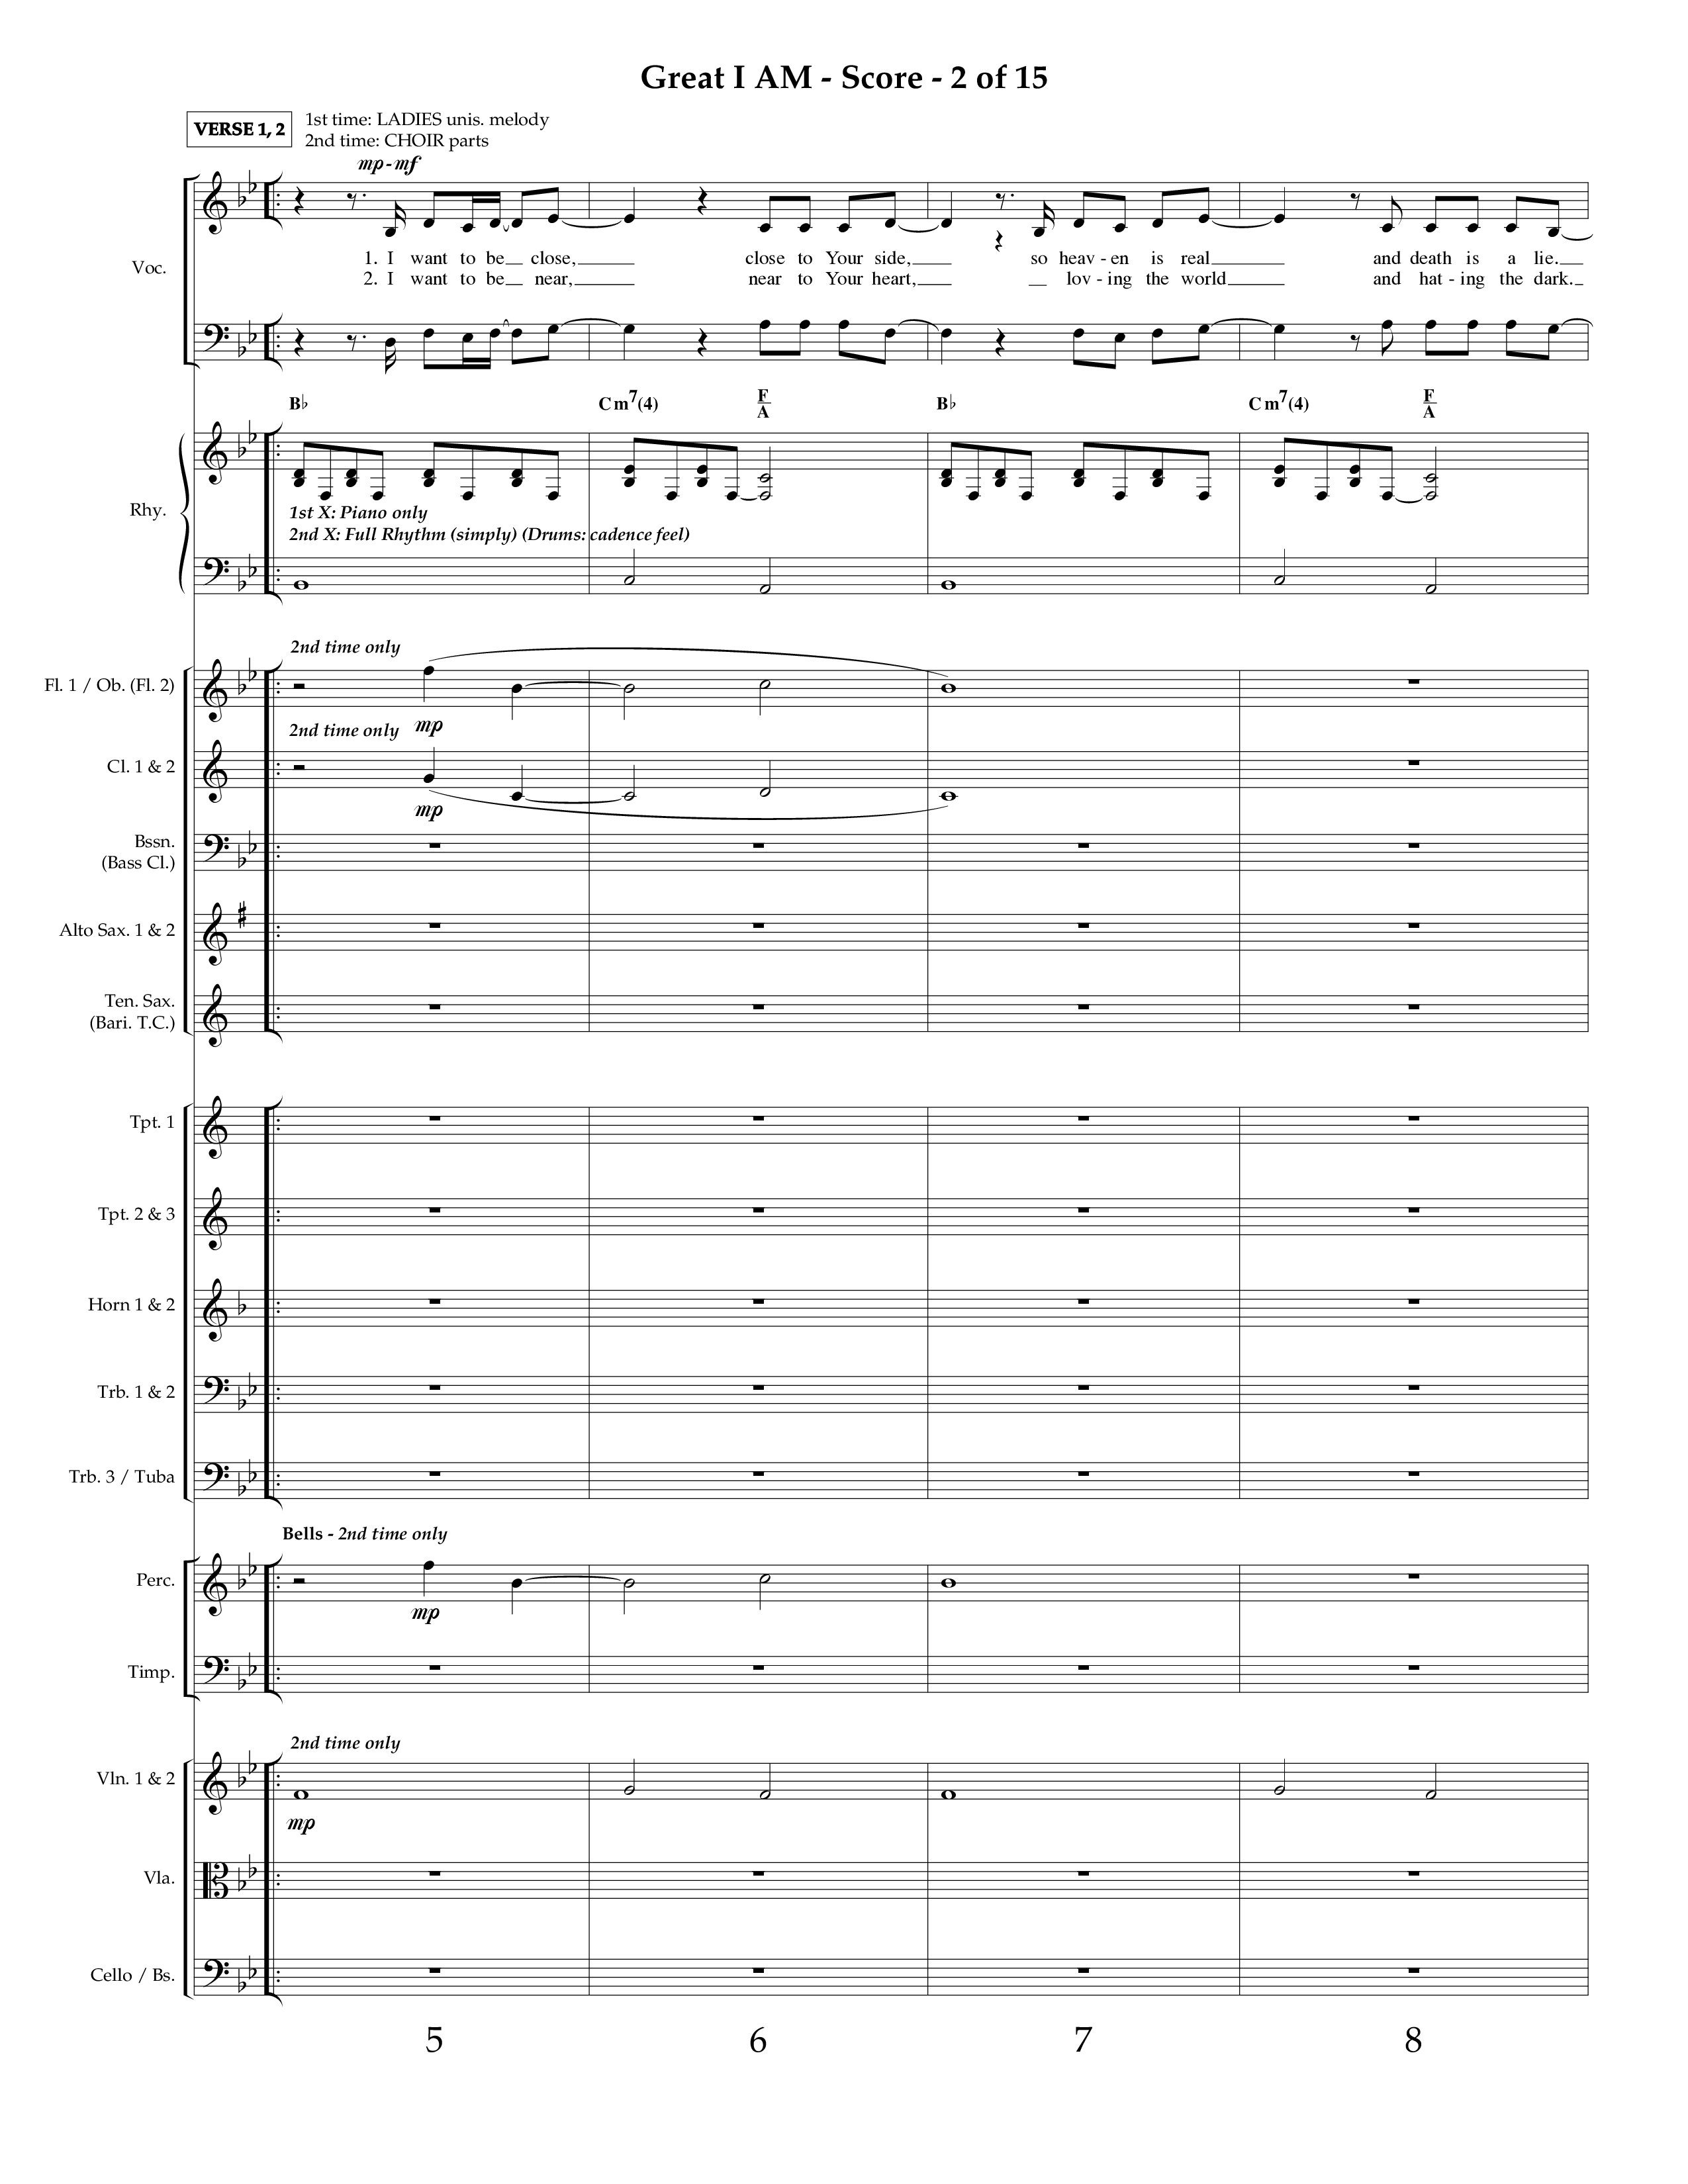 Great I Am (Choral Anthem SATB) Conductor's Score (Lifeway Choral / Arr. Ken Barker / Orch. Dave Williamson)